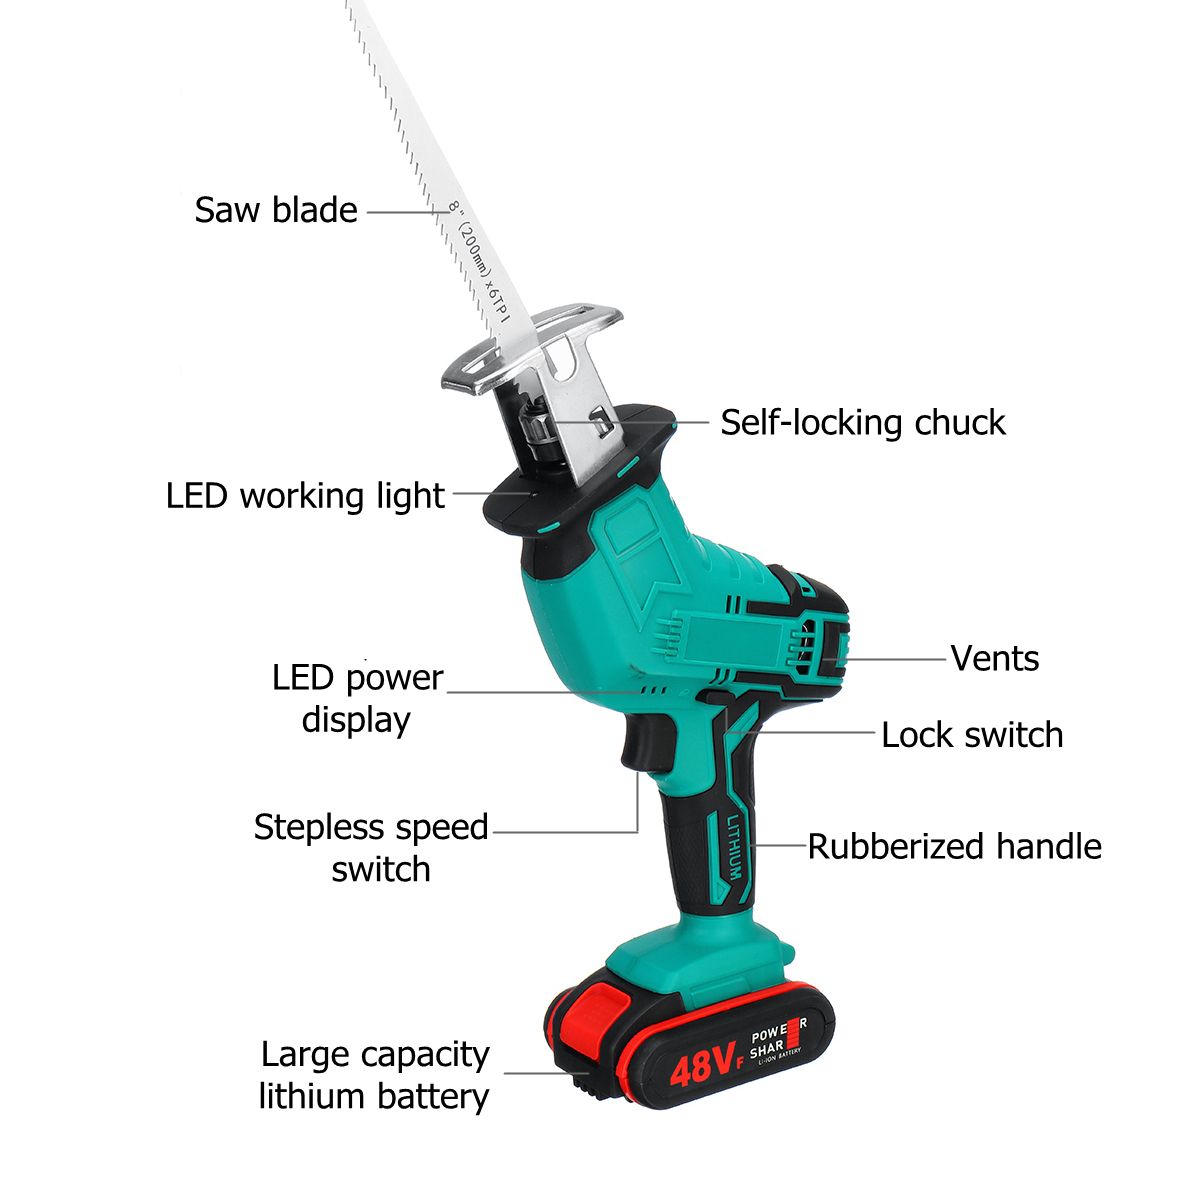 48V-Cordless-Reciprocating-Saw-With-Battery-Charger-recip-Sabre-Saw-New-Power-Tool-1734472